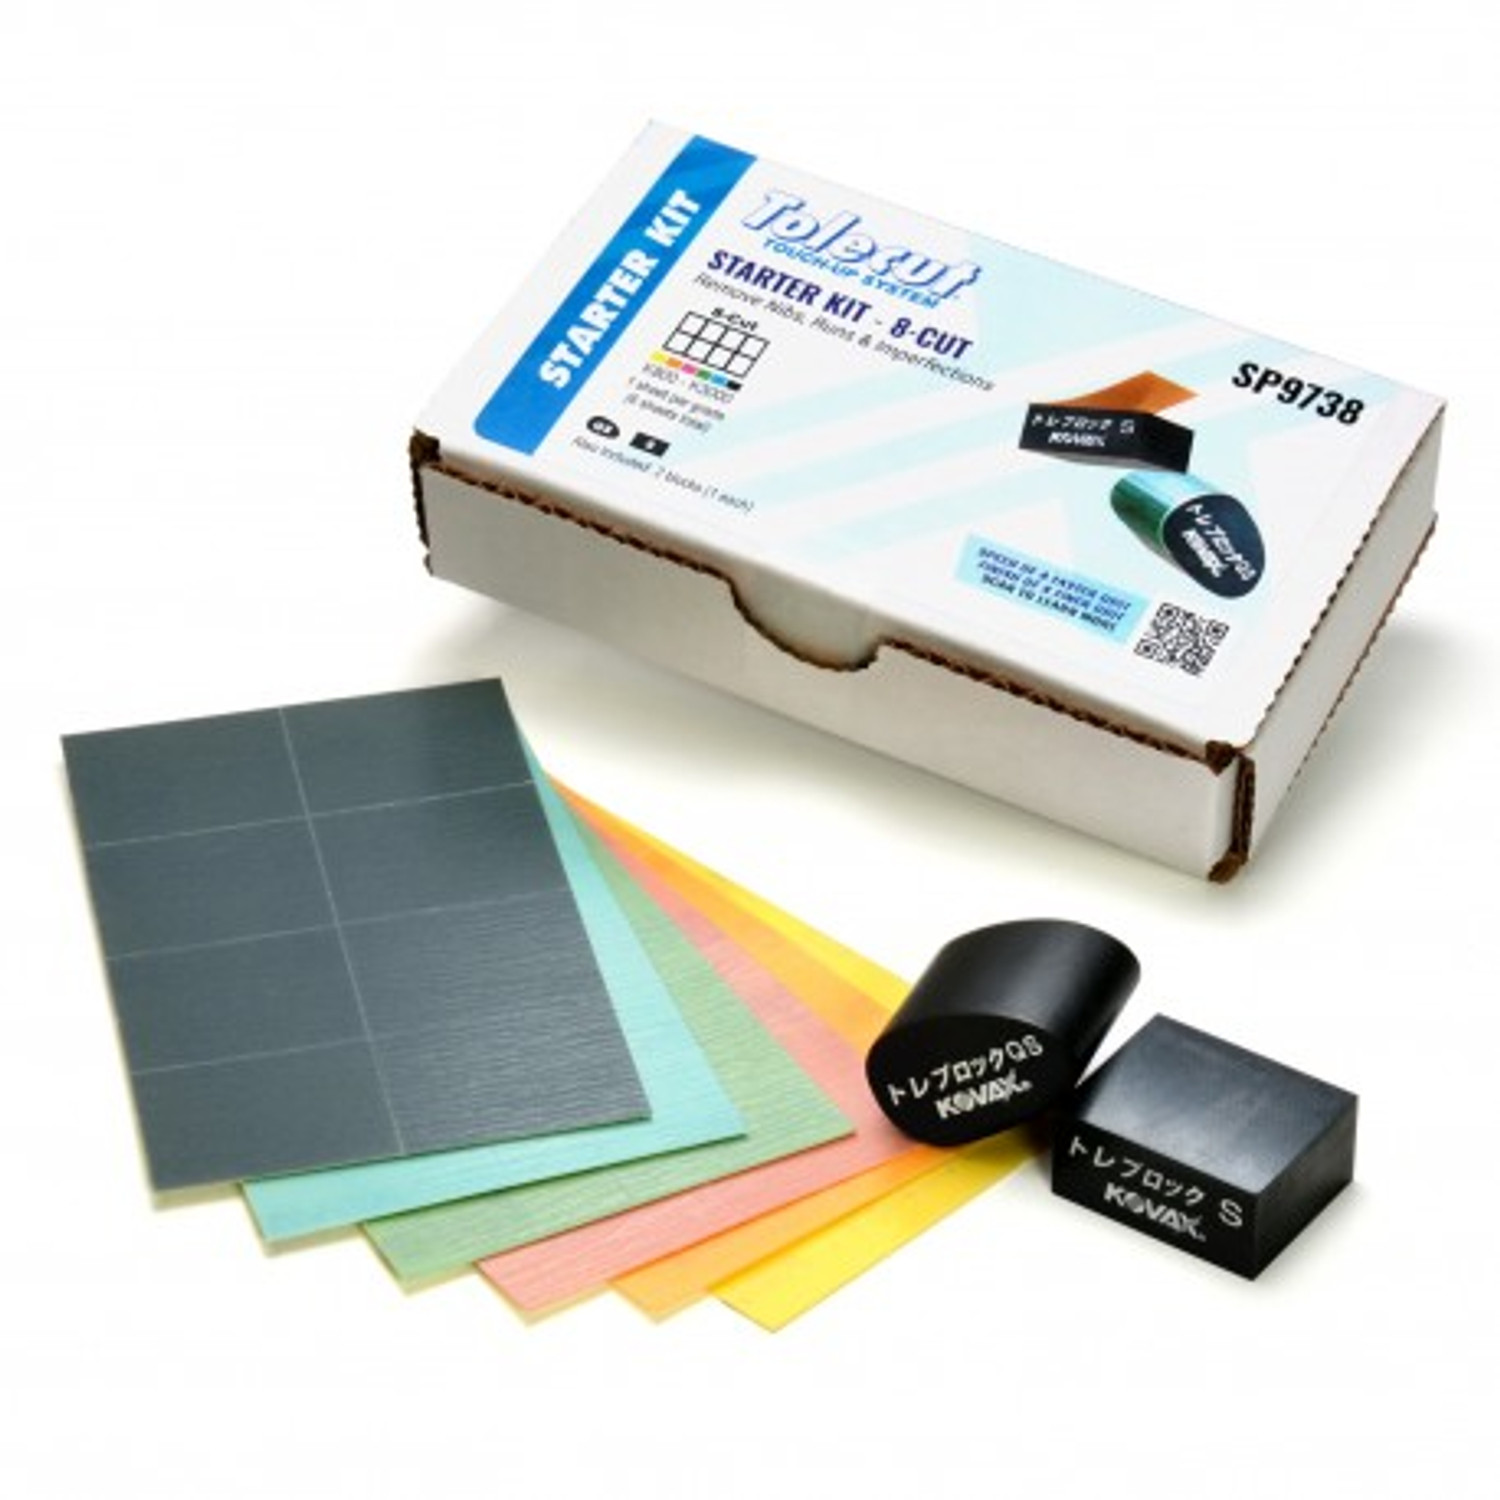  Complete Stencil and Paper Cutting Kit - Value Pack